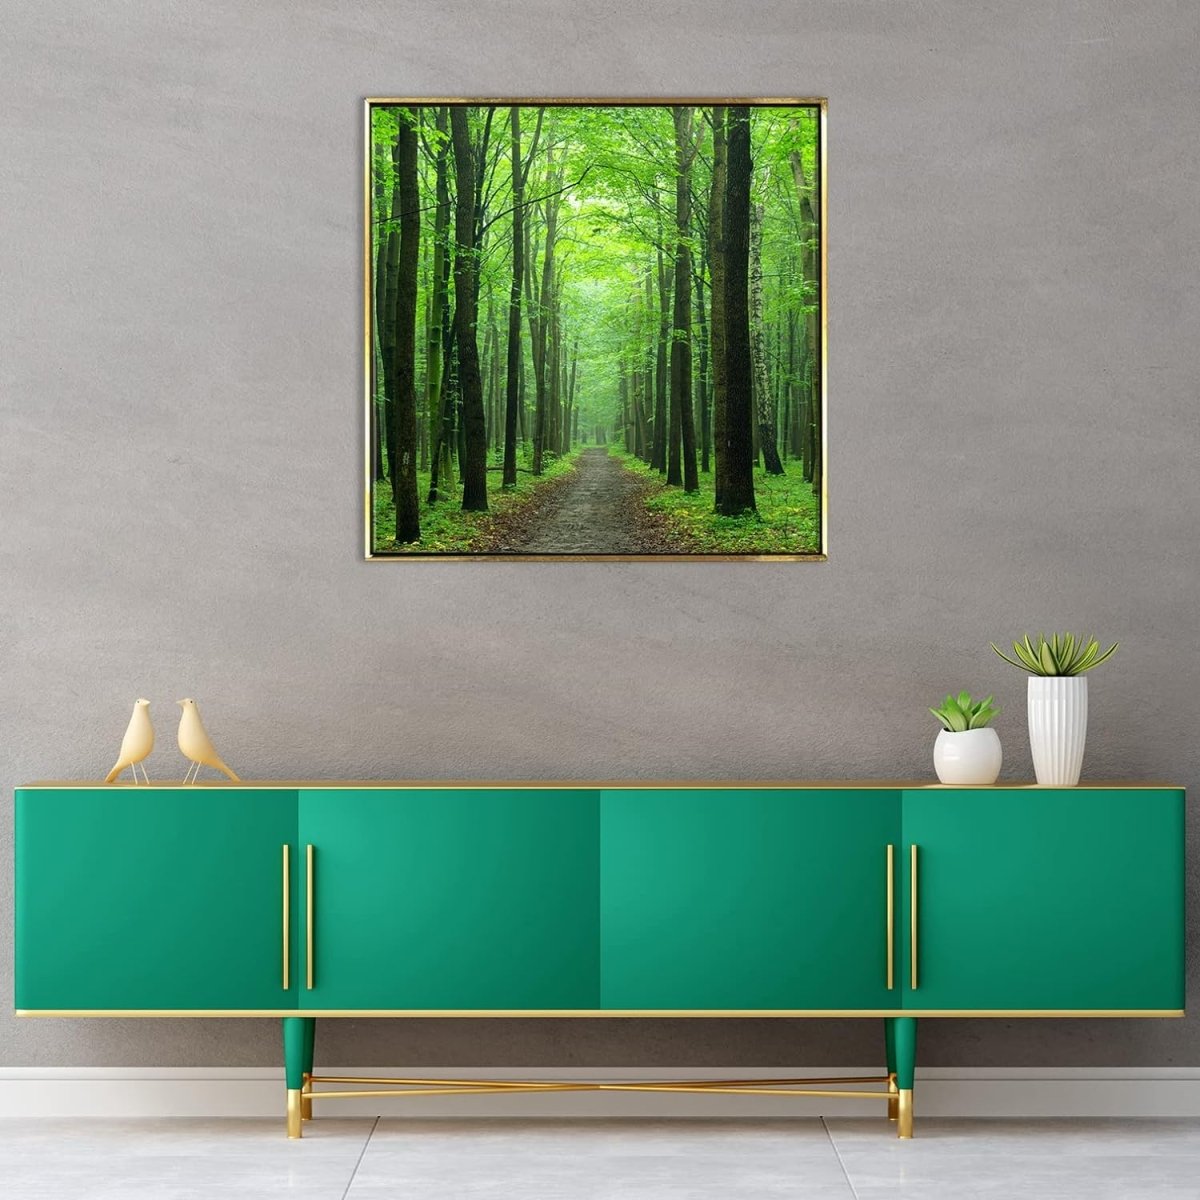 The Forest Trail Framed Canvas Wall Art (24 x 24 Inches)